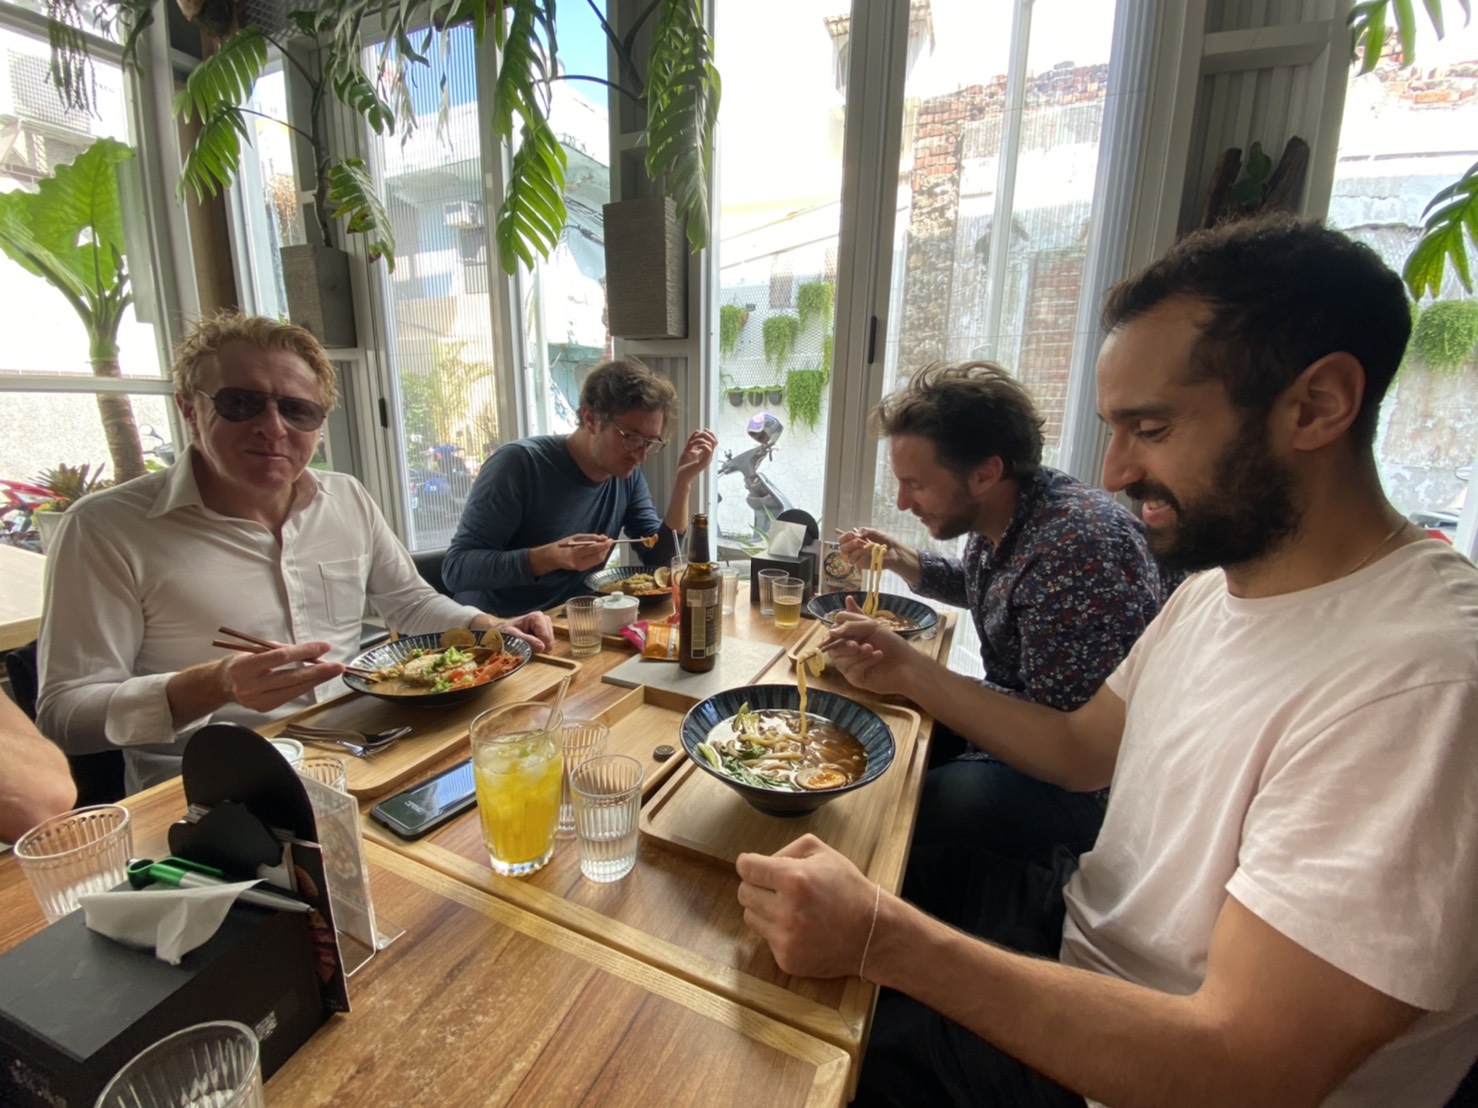 The French team tried some nice food at a local restaurant devoted to reducing uses of plastics. (Photo courtesy: Lynn Mo)